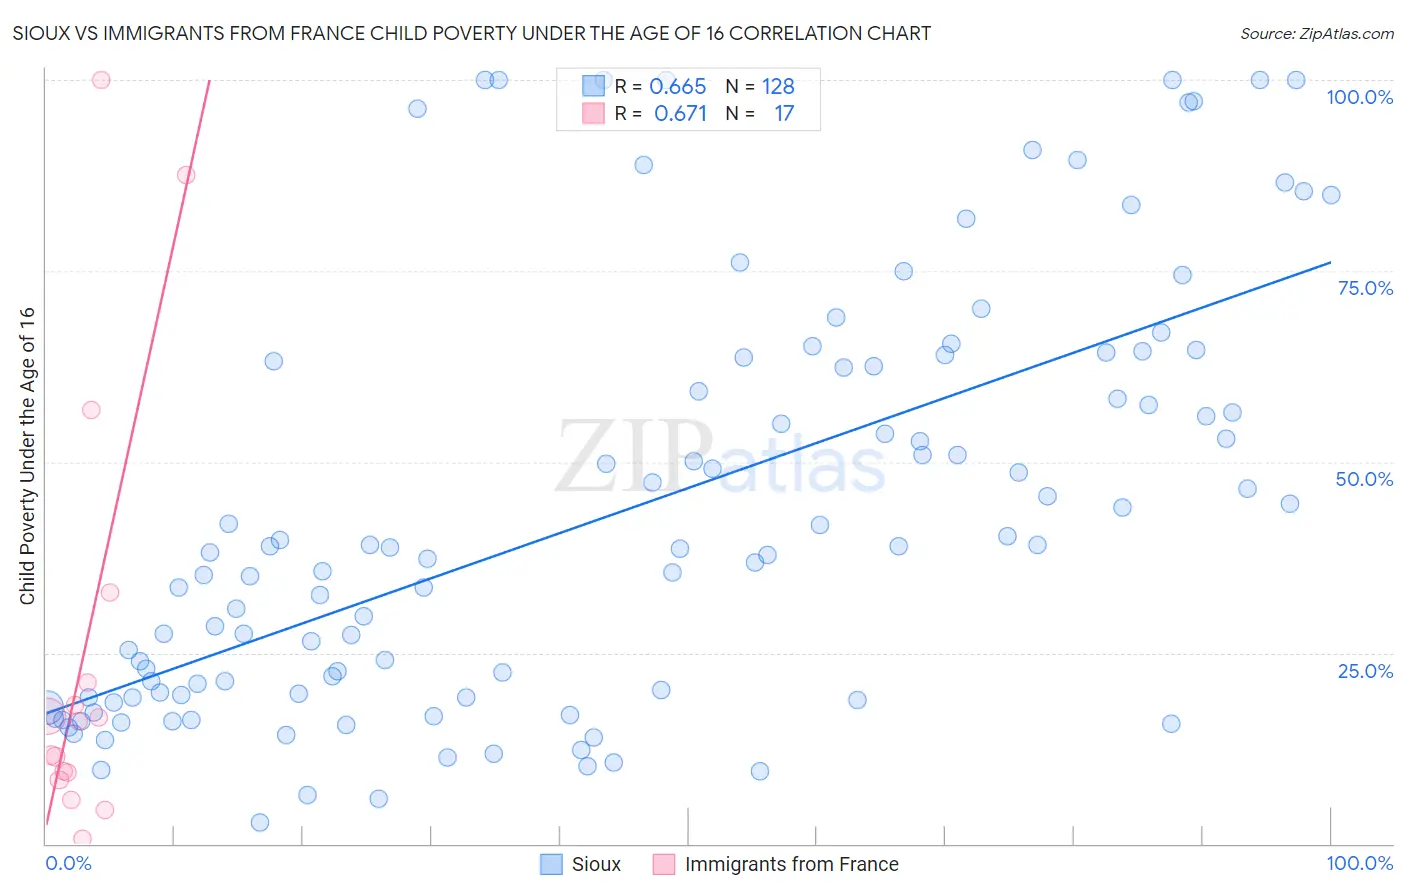 Sioux vs Immigrants from France Child Poverty Under the Age of 16